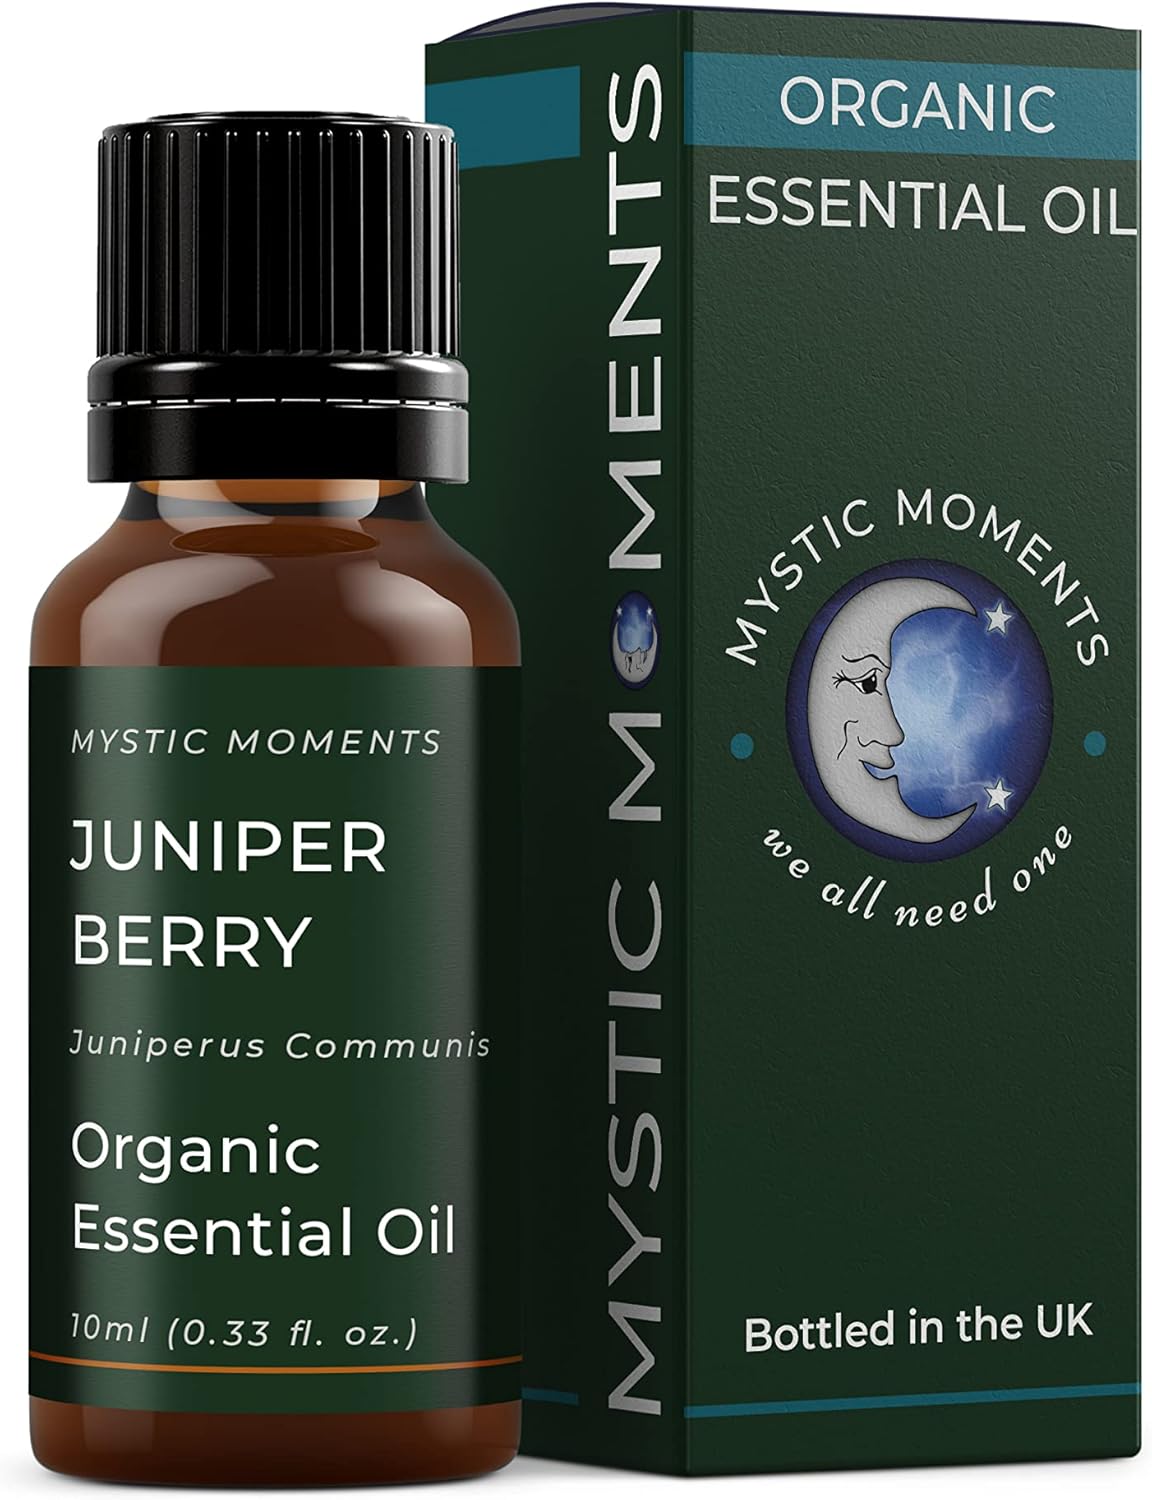 Mystic Moments | Organic Juniper Berry Essential Oil 10ml - Pure & Natural oil for Diffusers, Aromatherapy & Massage Blends Vegan GMO Free